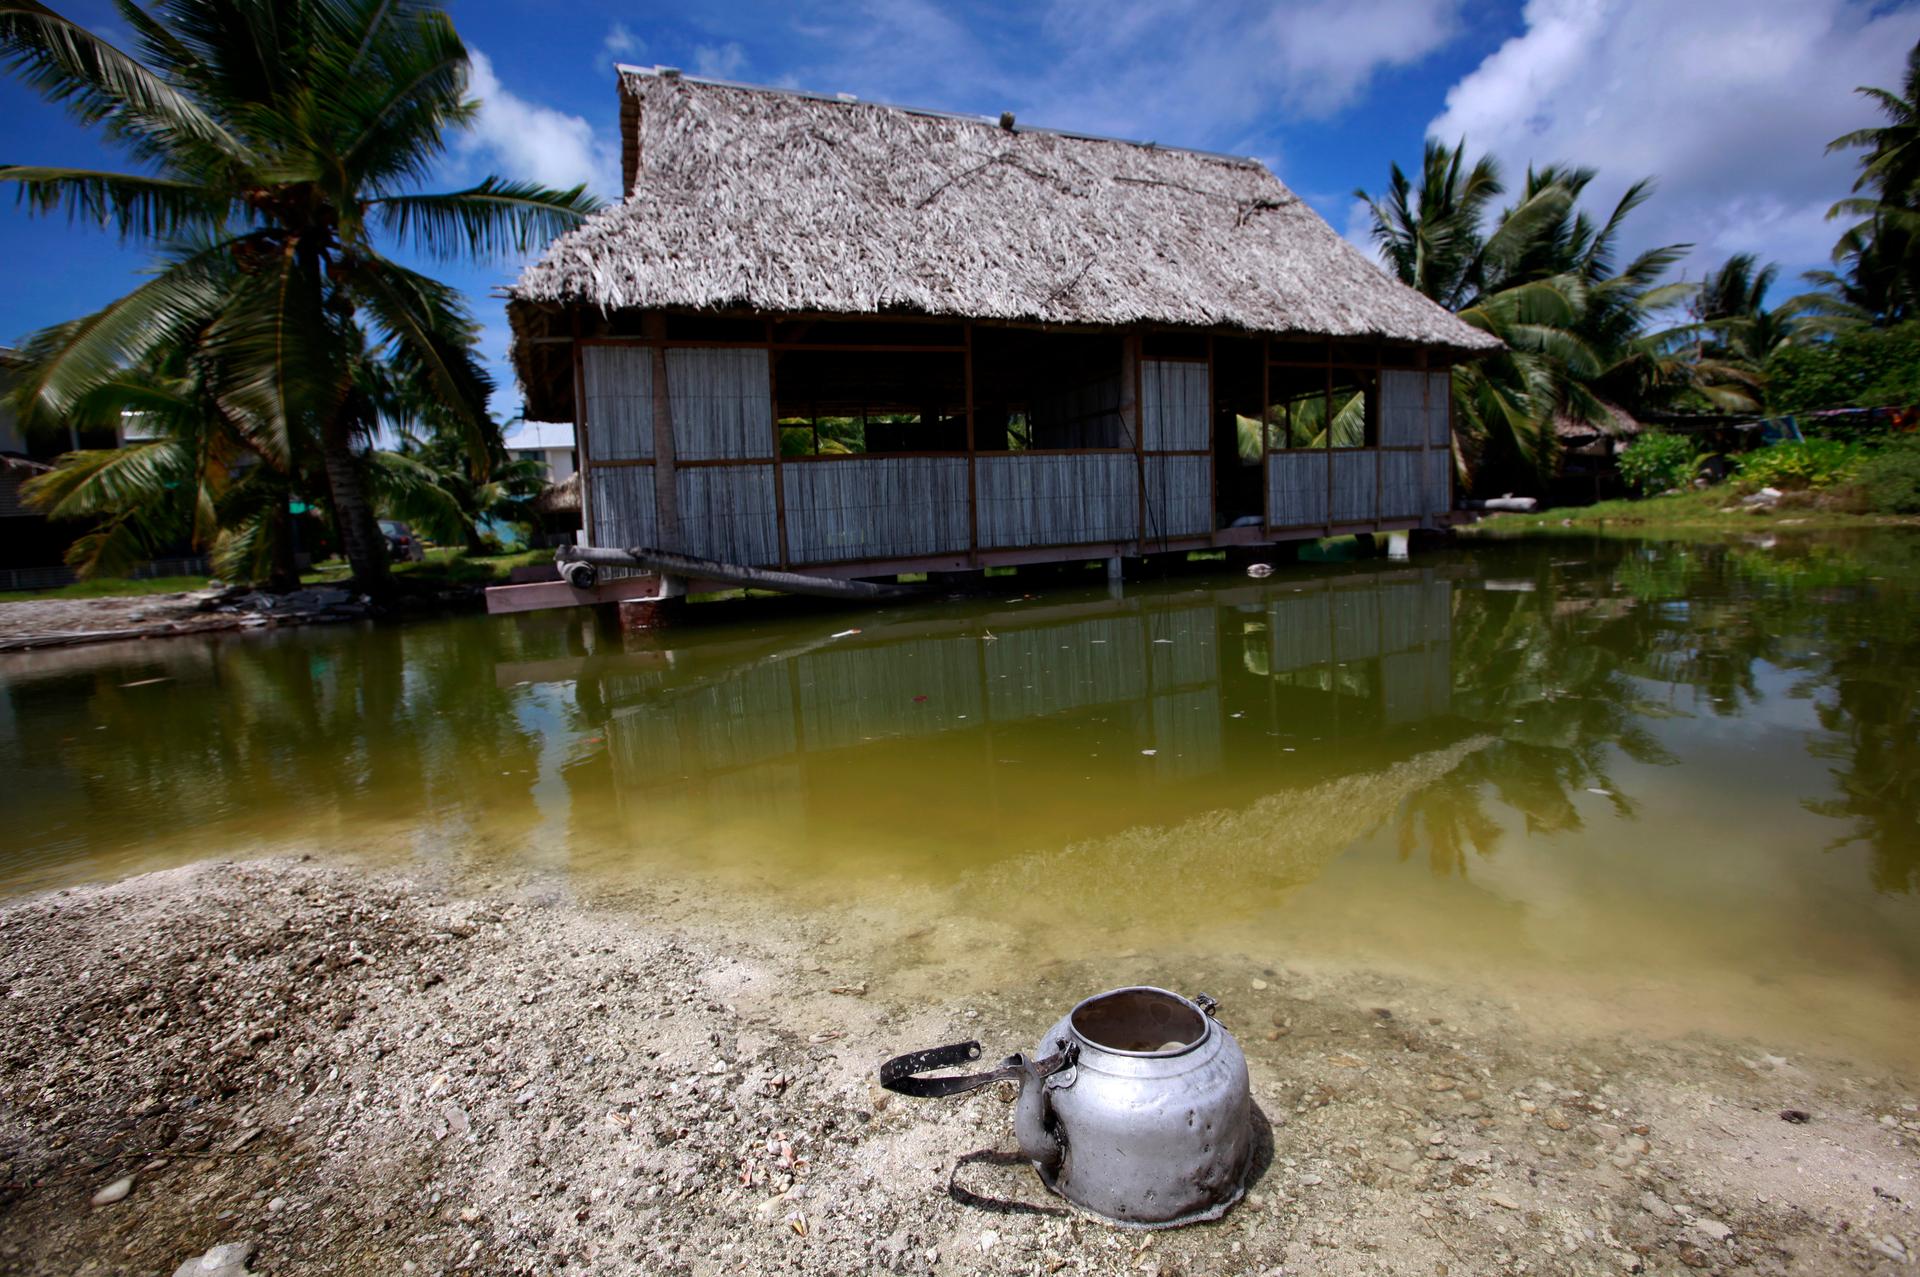 An abandoned house next to a small lagoon on South Tarawa in the central Pacific island nation of Kiribati in 2013. Nations like Kiribati and the Marshall Islands may disappear due to climate change.